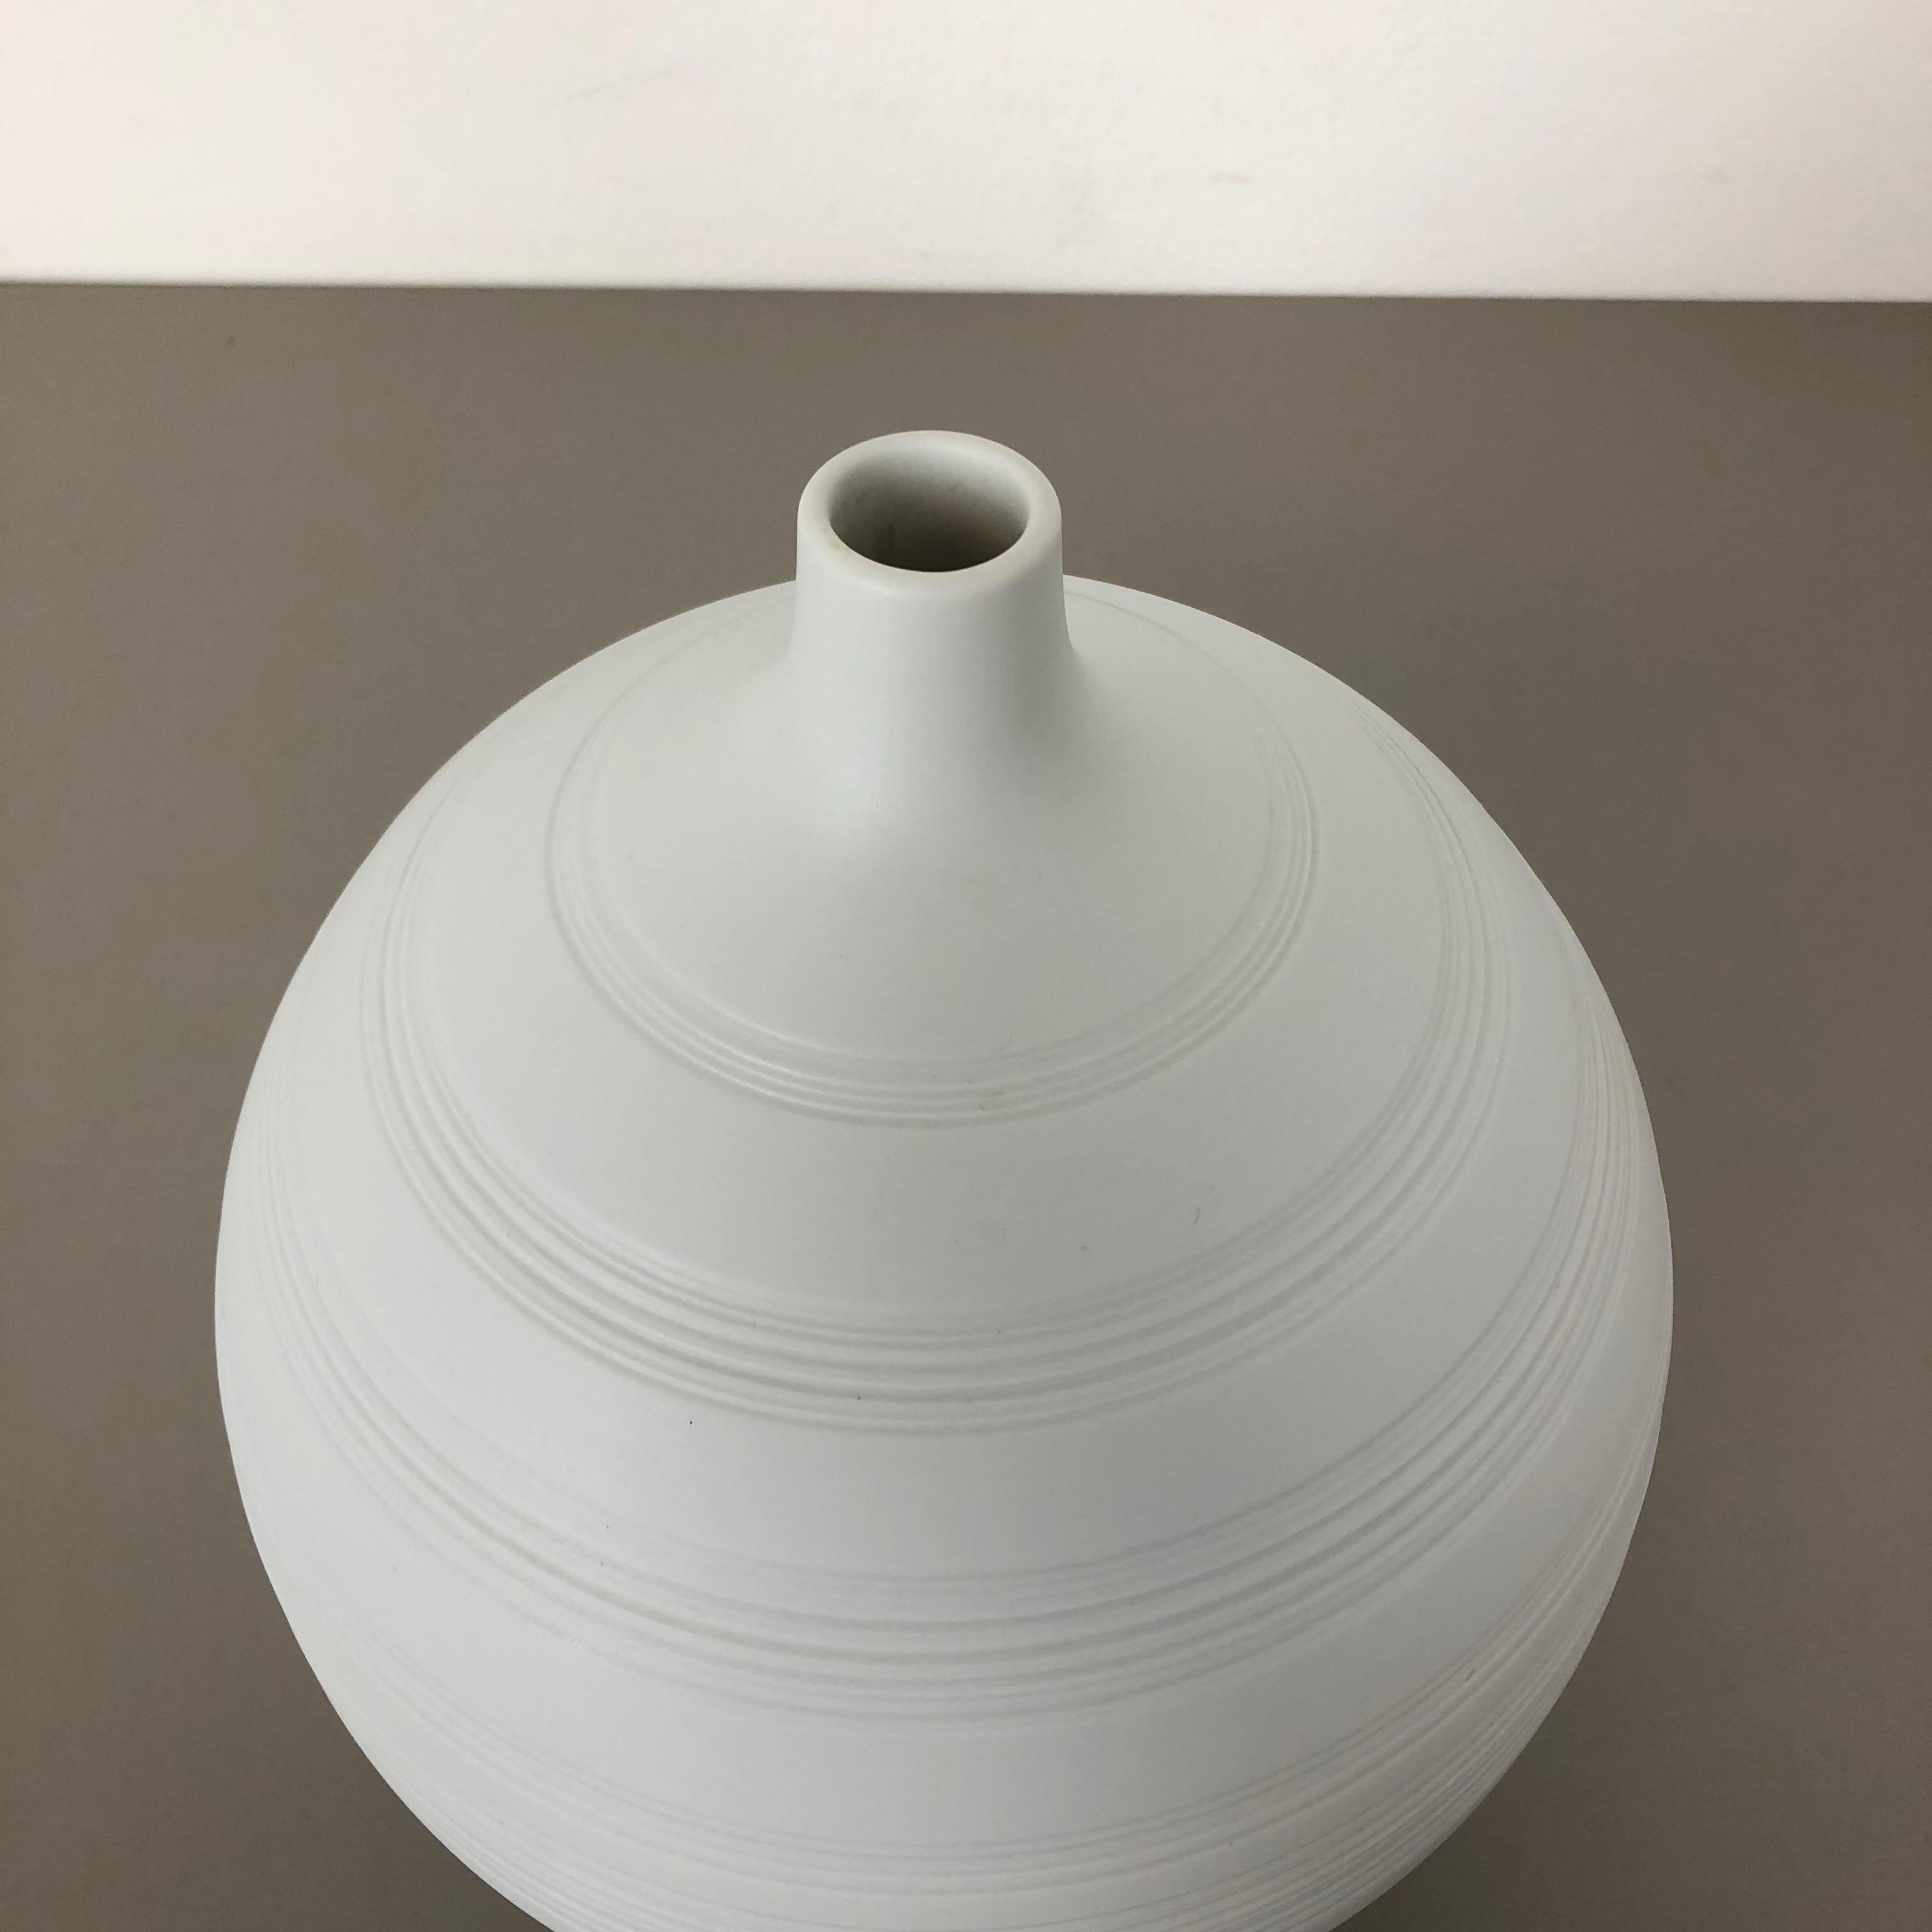 OP Art Vase Biscuit Porcelain by Hans Achtziger for Hutschenreuther, 1970s For Sale 4